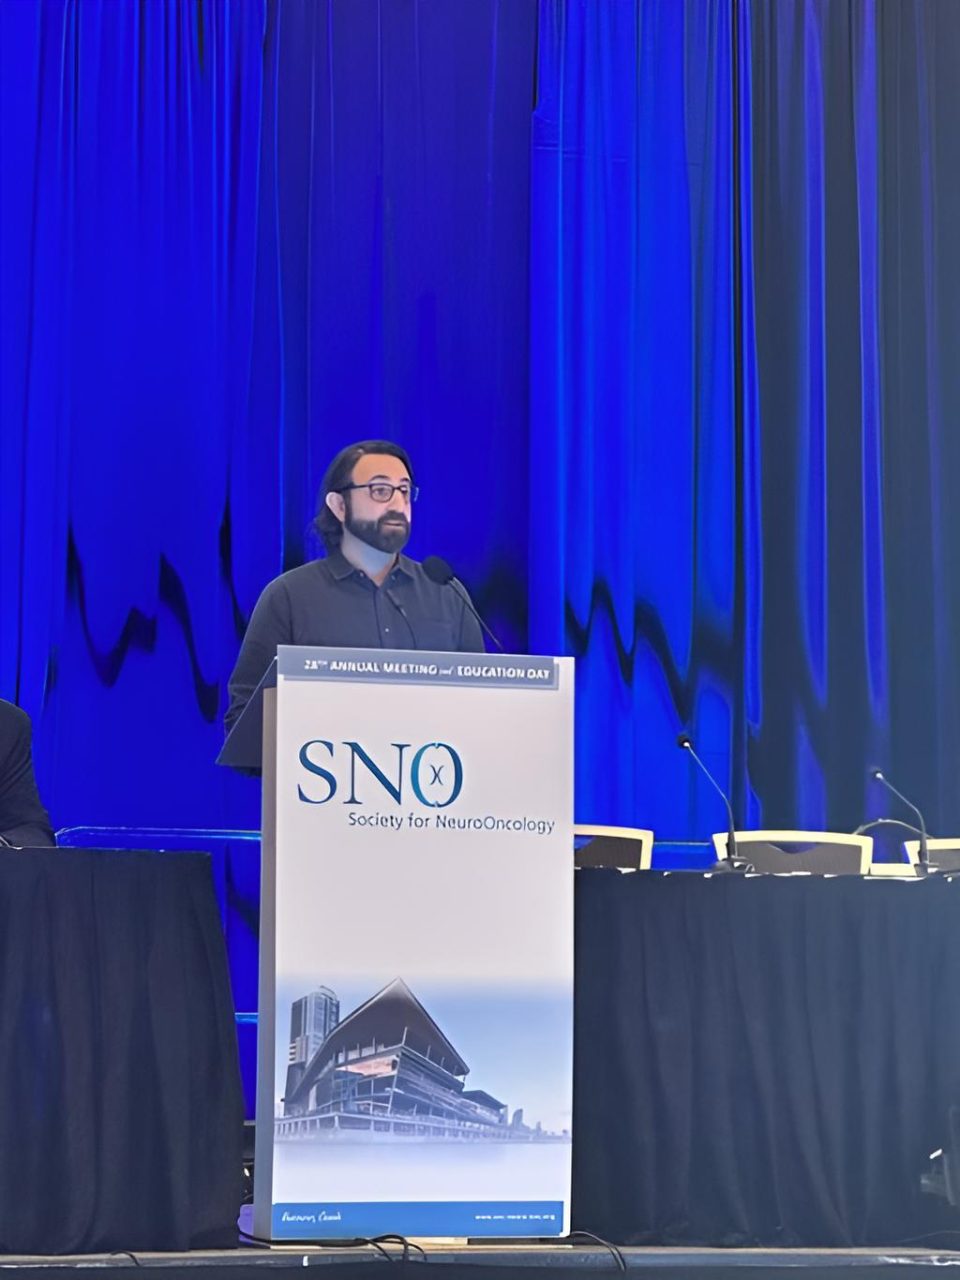 Nick Vitanza: Honored to speak at SNO2023 about intracranial B7-H3 CART cell development and trials for patients with DIPG